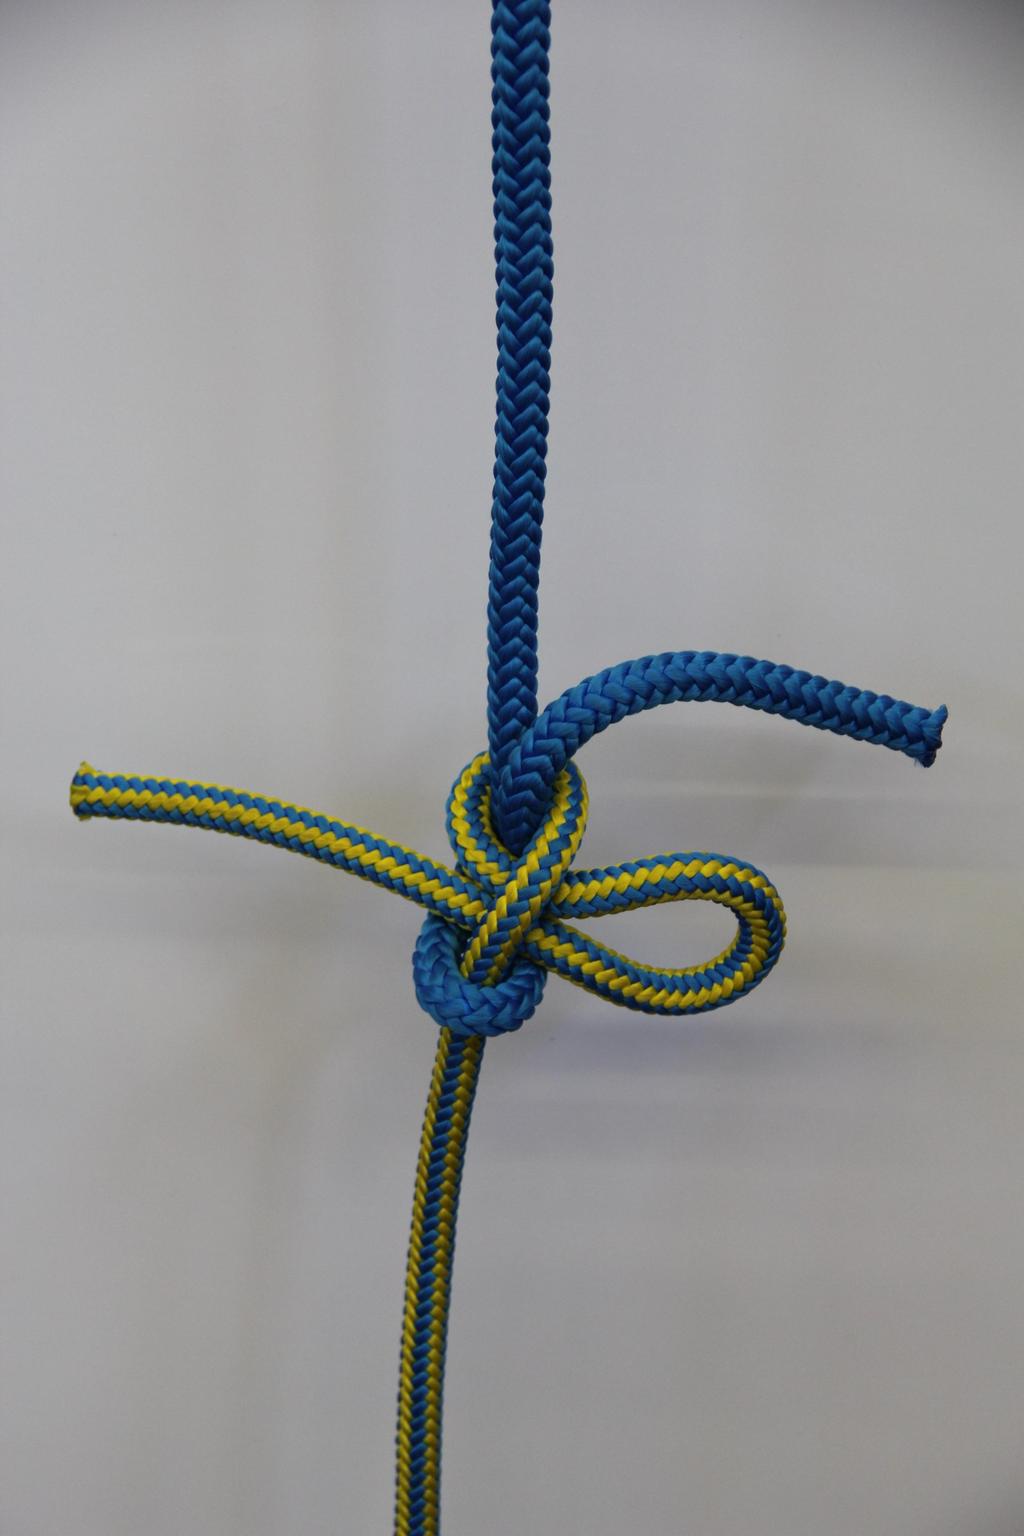 Slip knot and Quick hitch: almost any knot can be slipped.